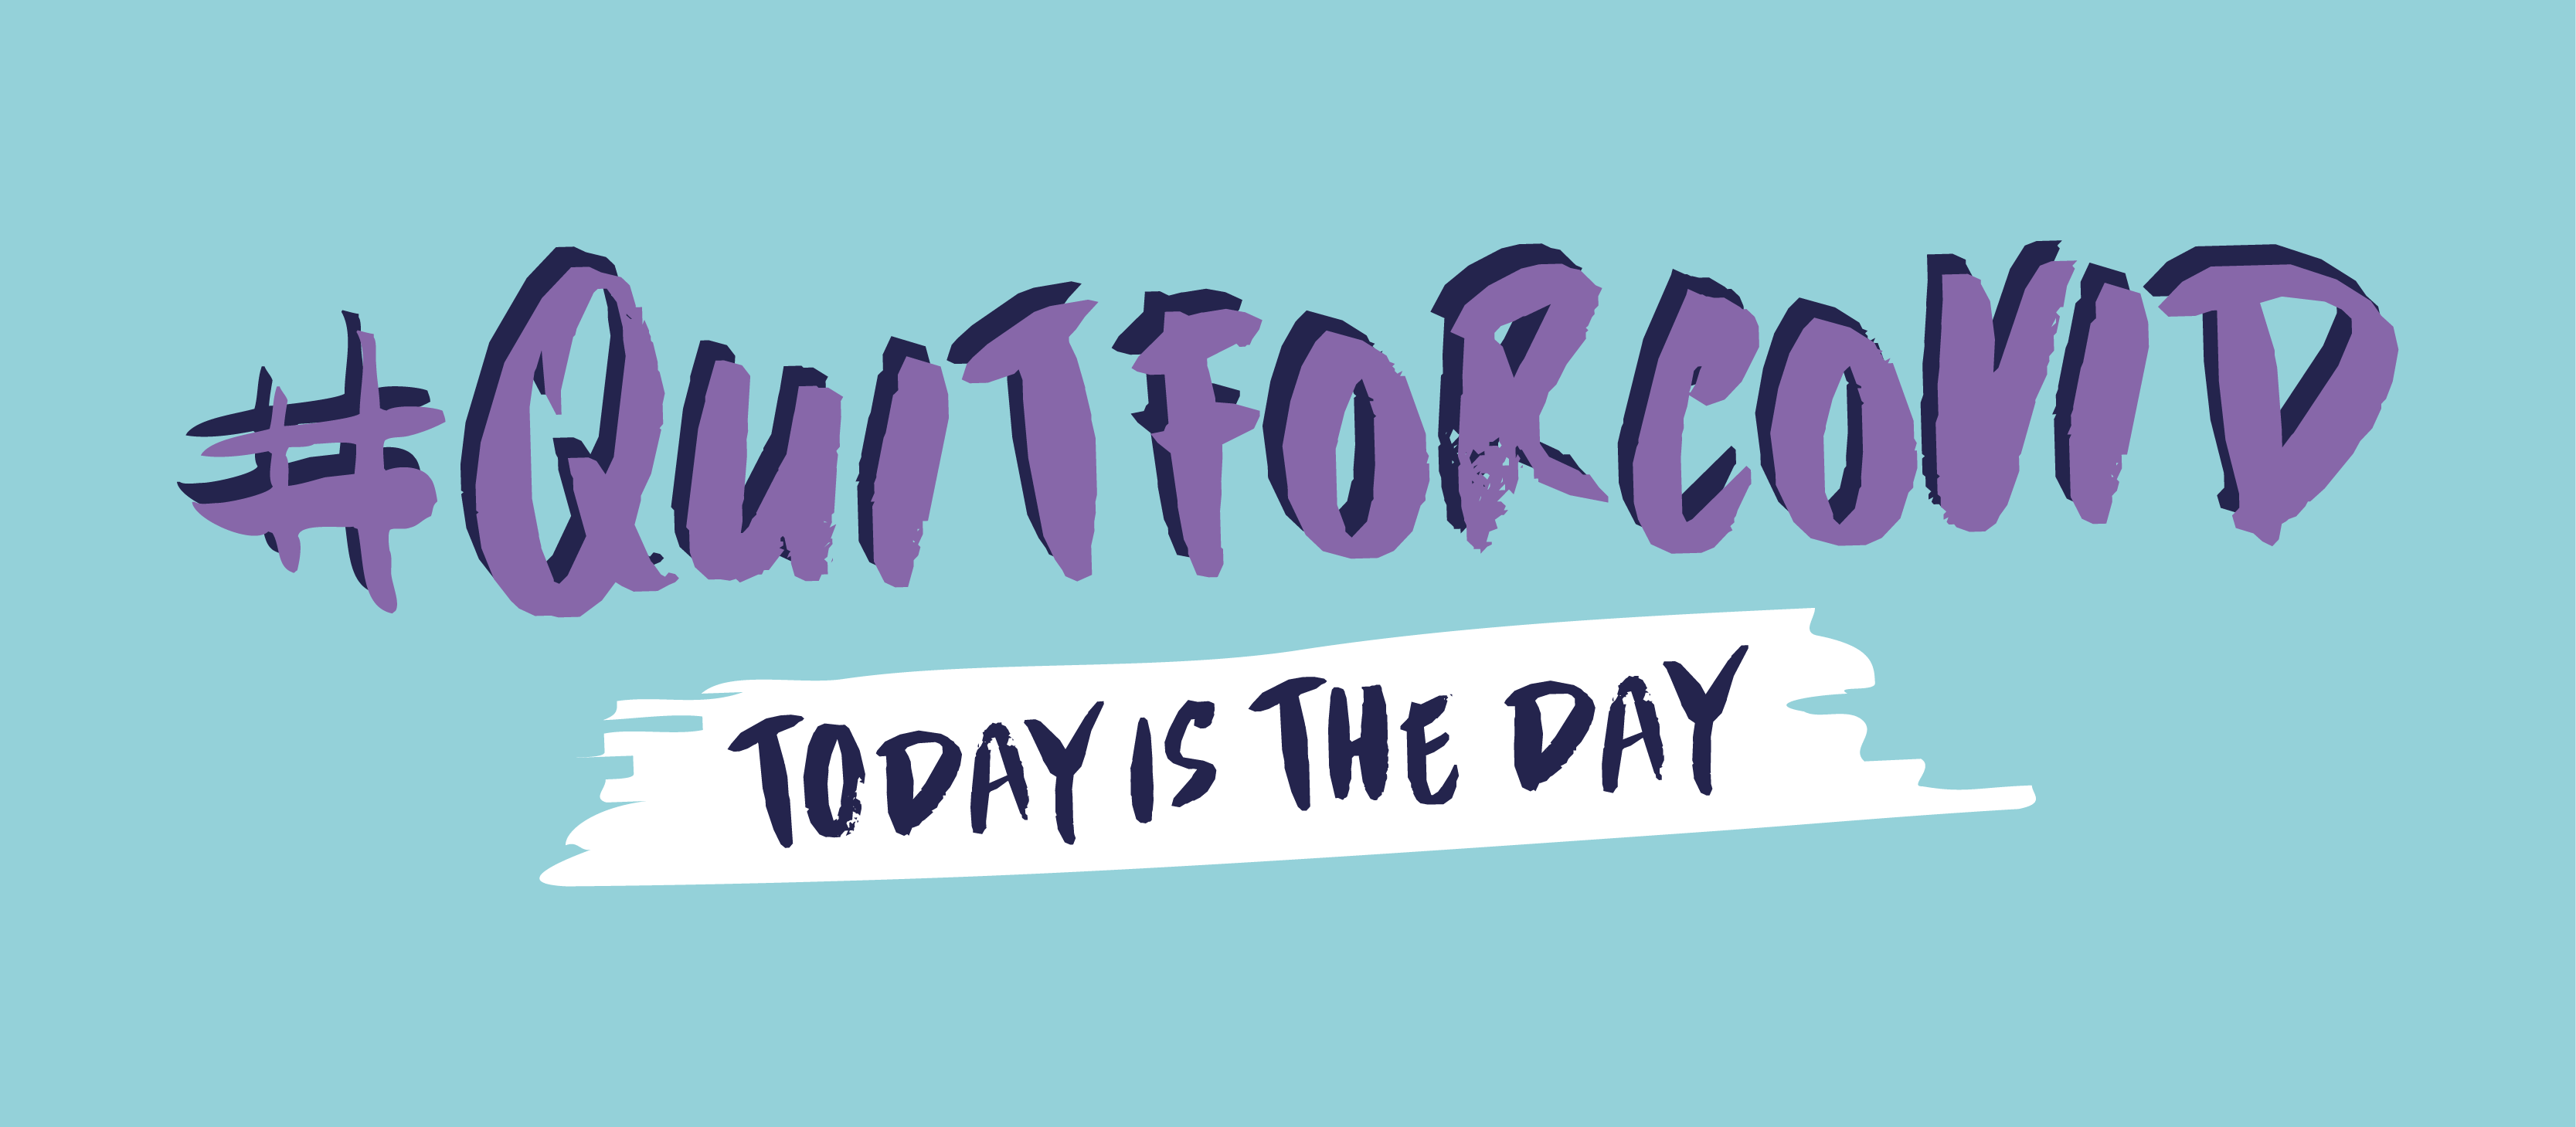 #QuitForCovid - Today is the Day